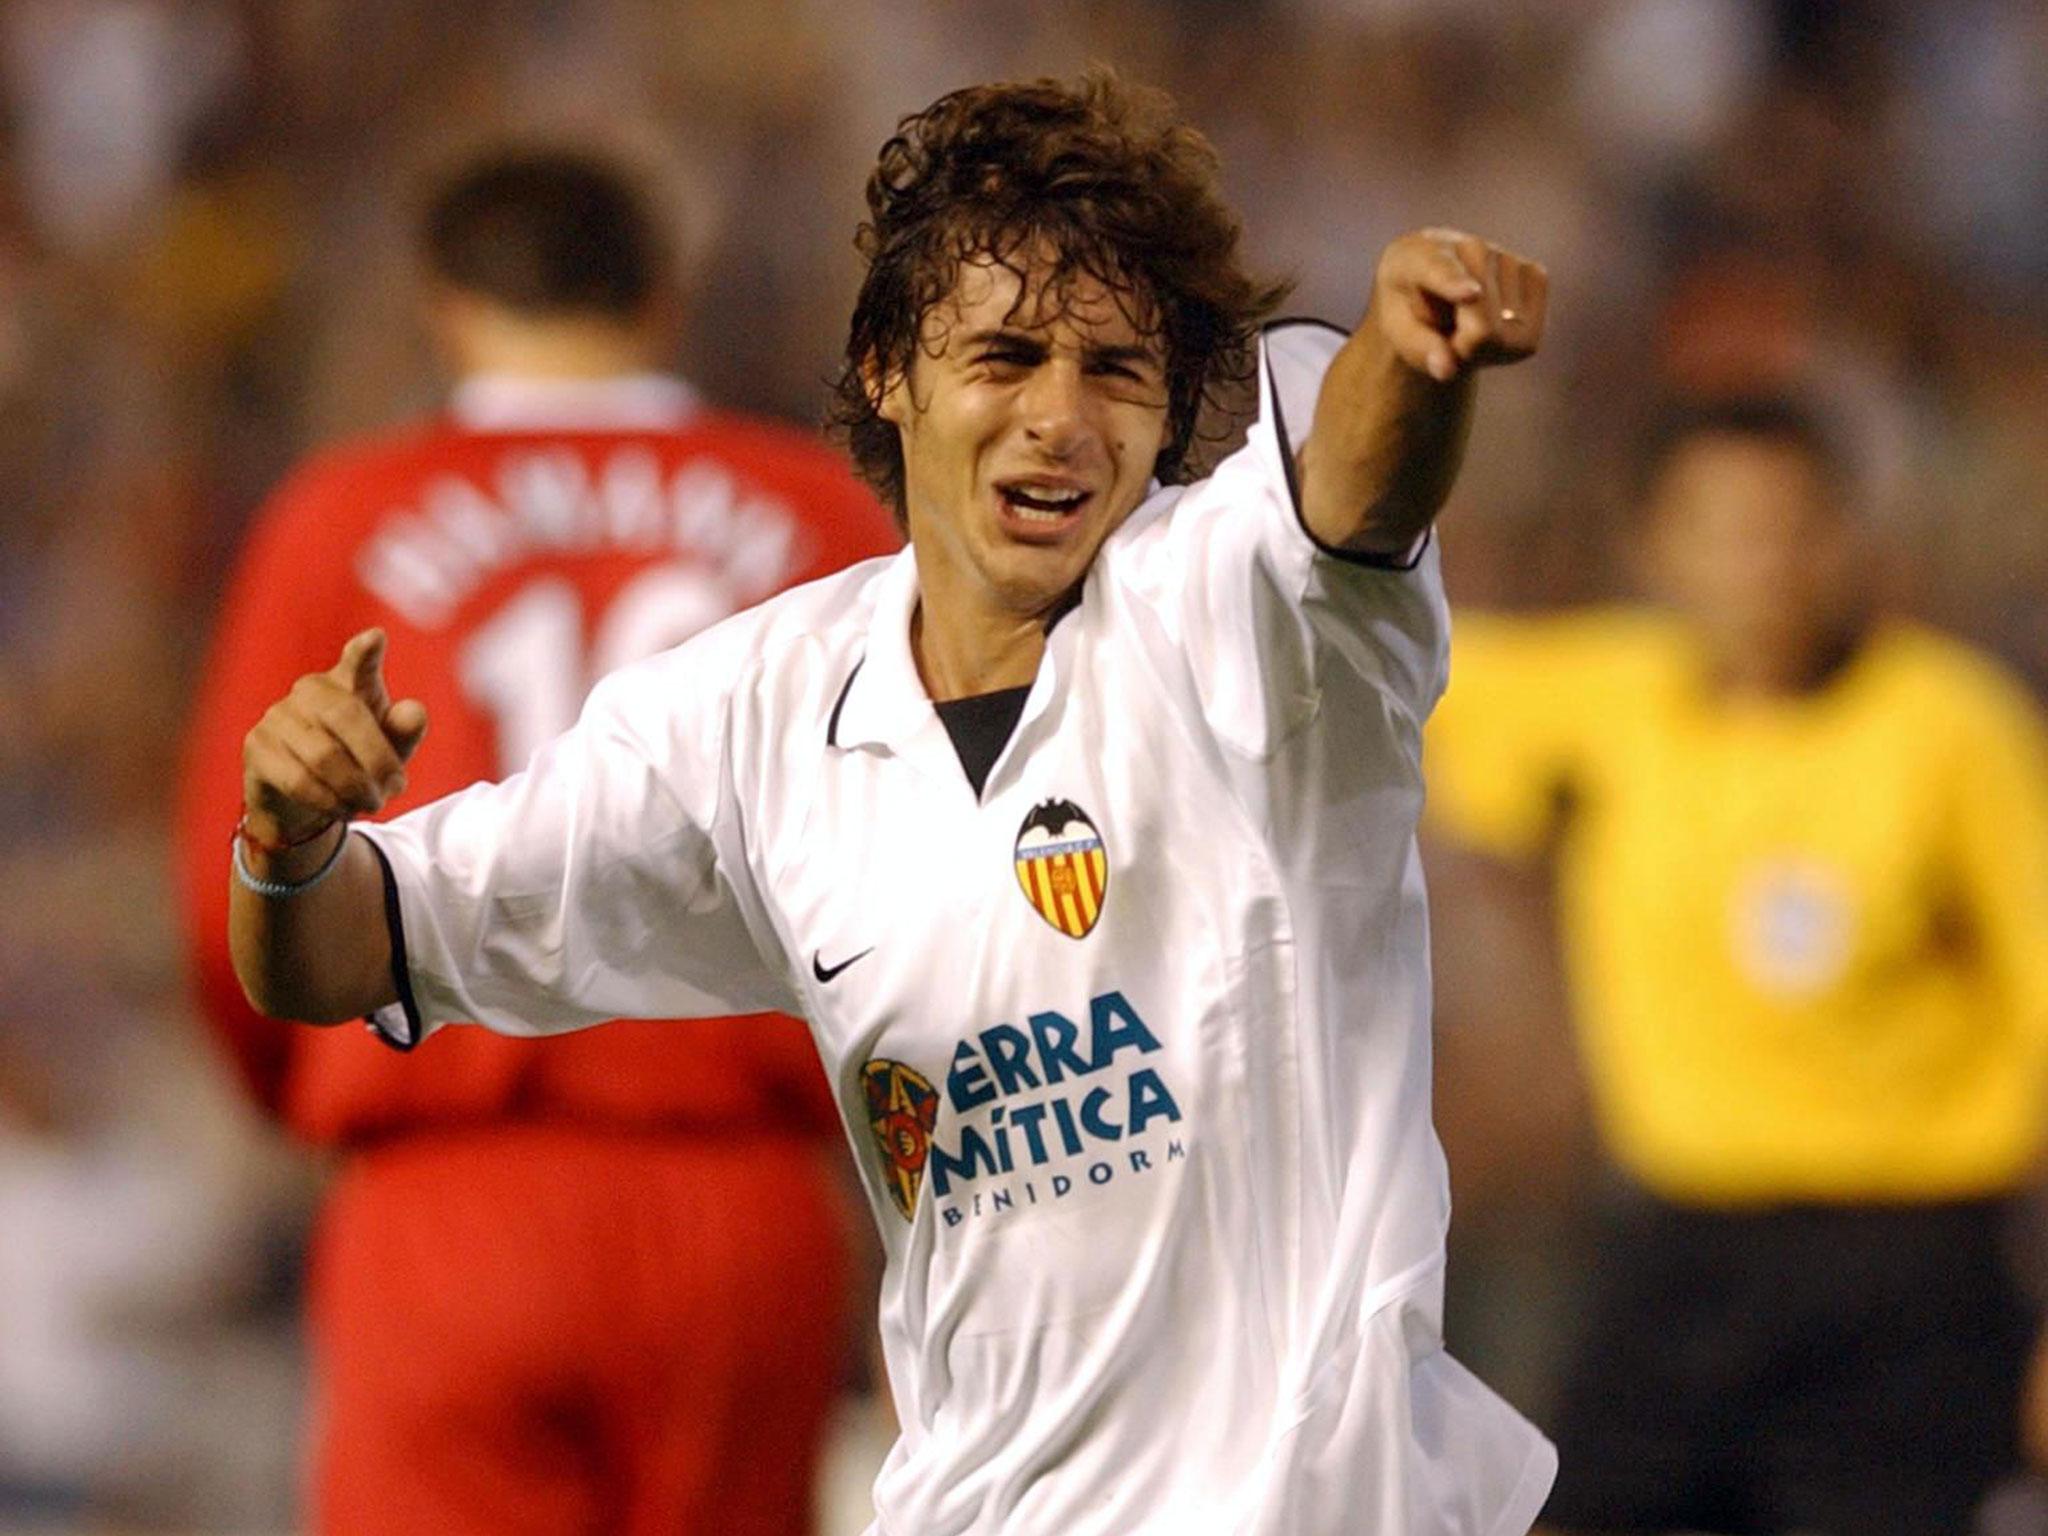 Aimar was another star of that famed Valencia team